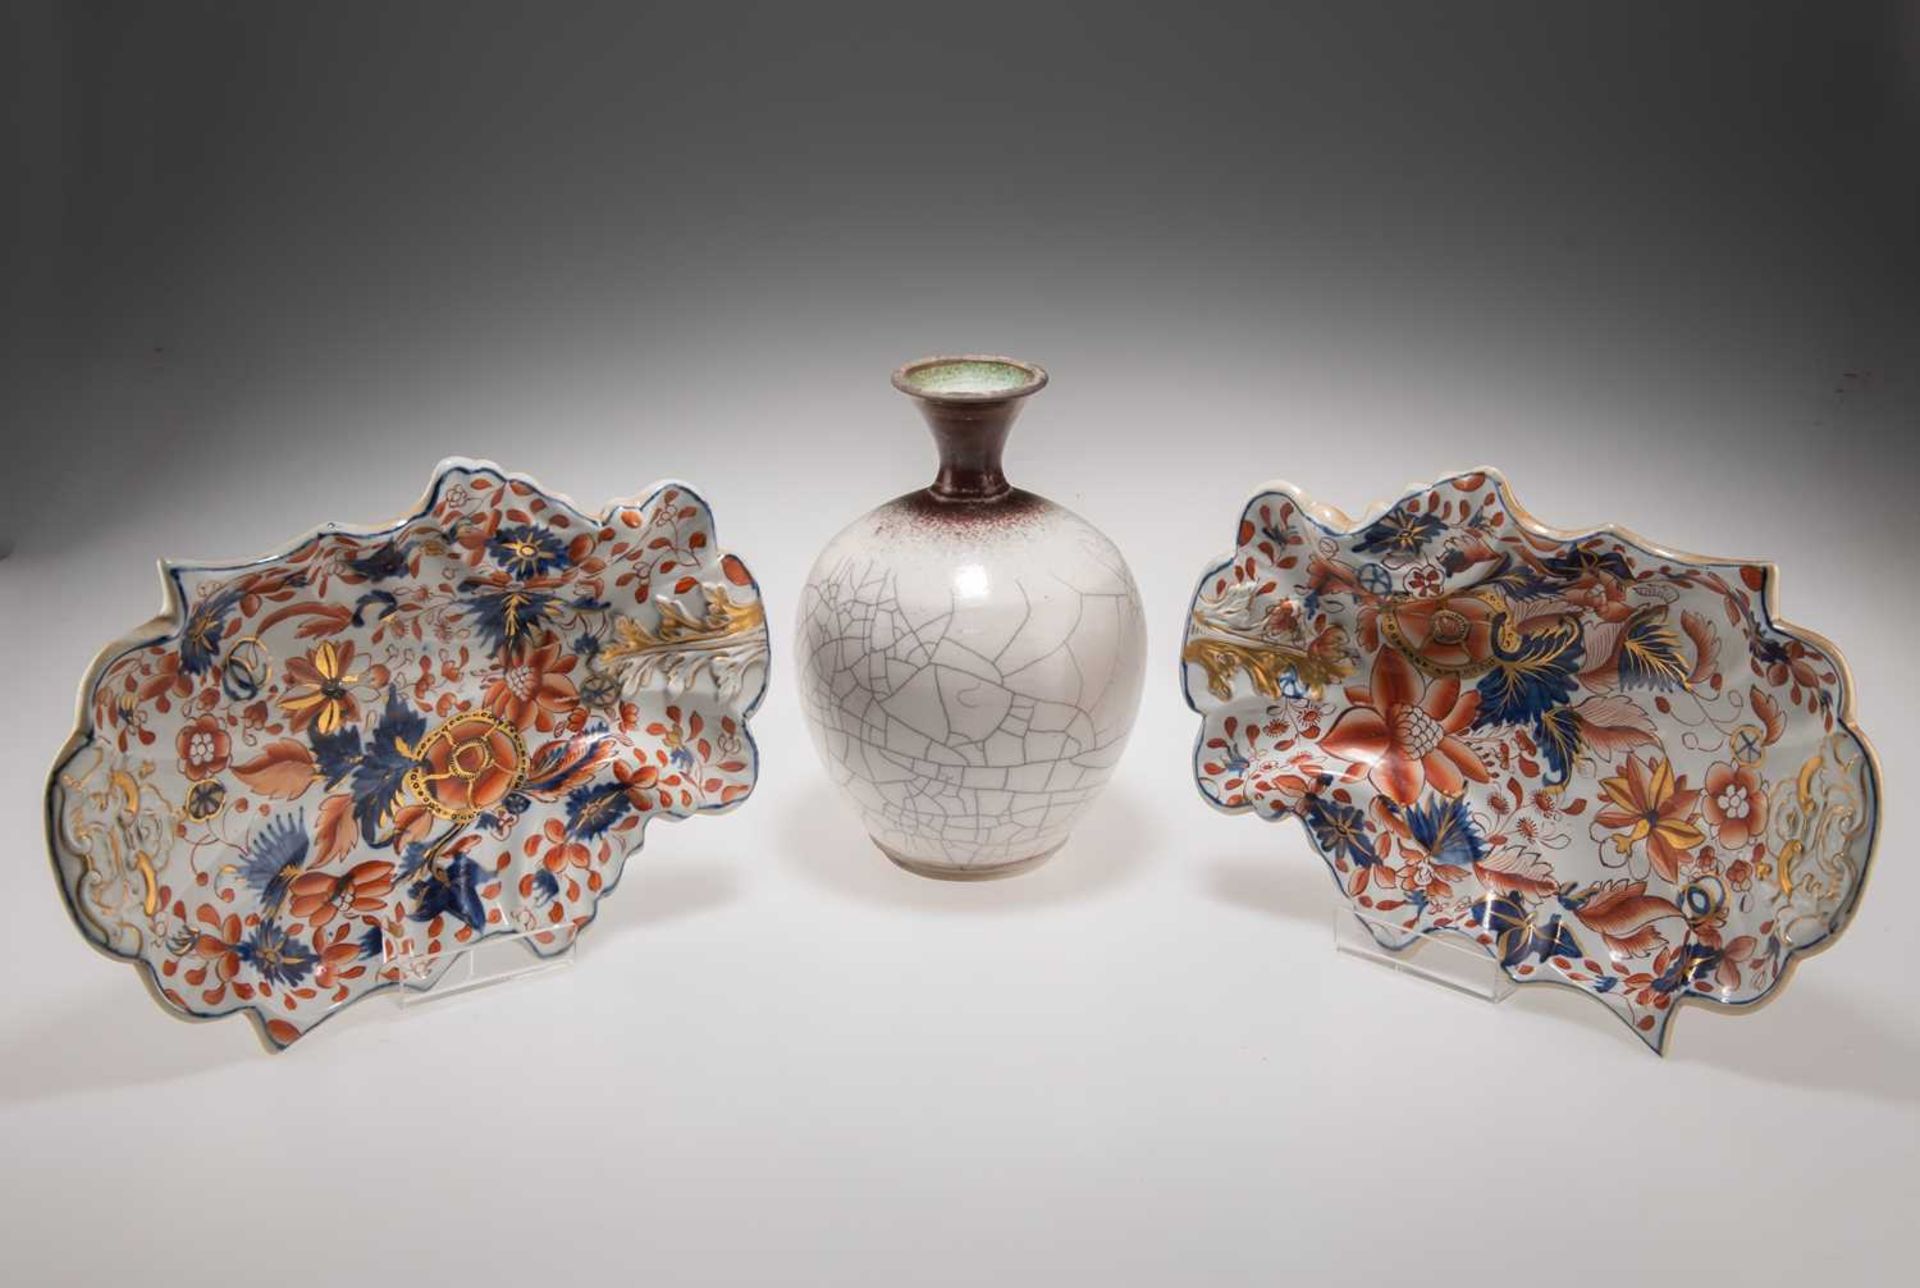 A PAIR OF MASON'S PATENT IRONSTONE DISHES, EARLY 19TH CENTURY